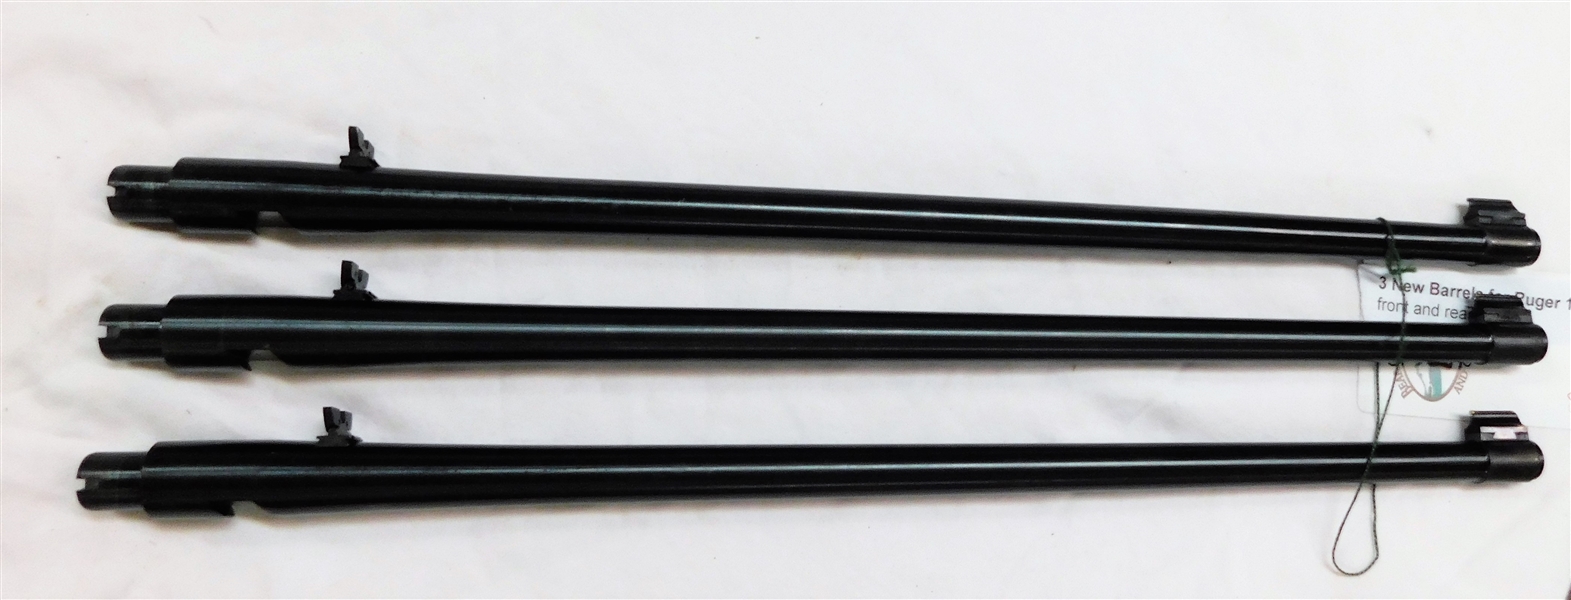 3 New Barrels for Ruger 10/22 - with Front and Rear Sights